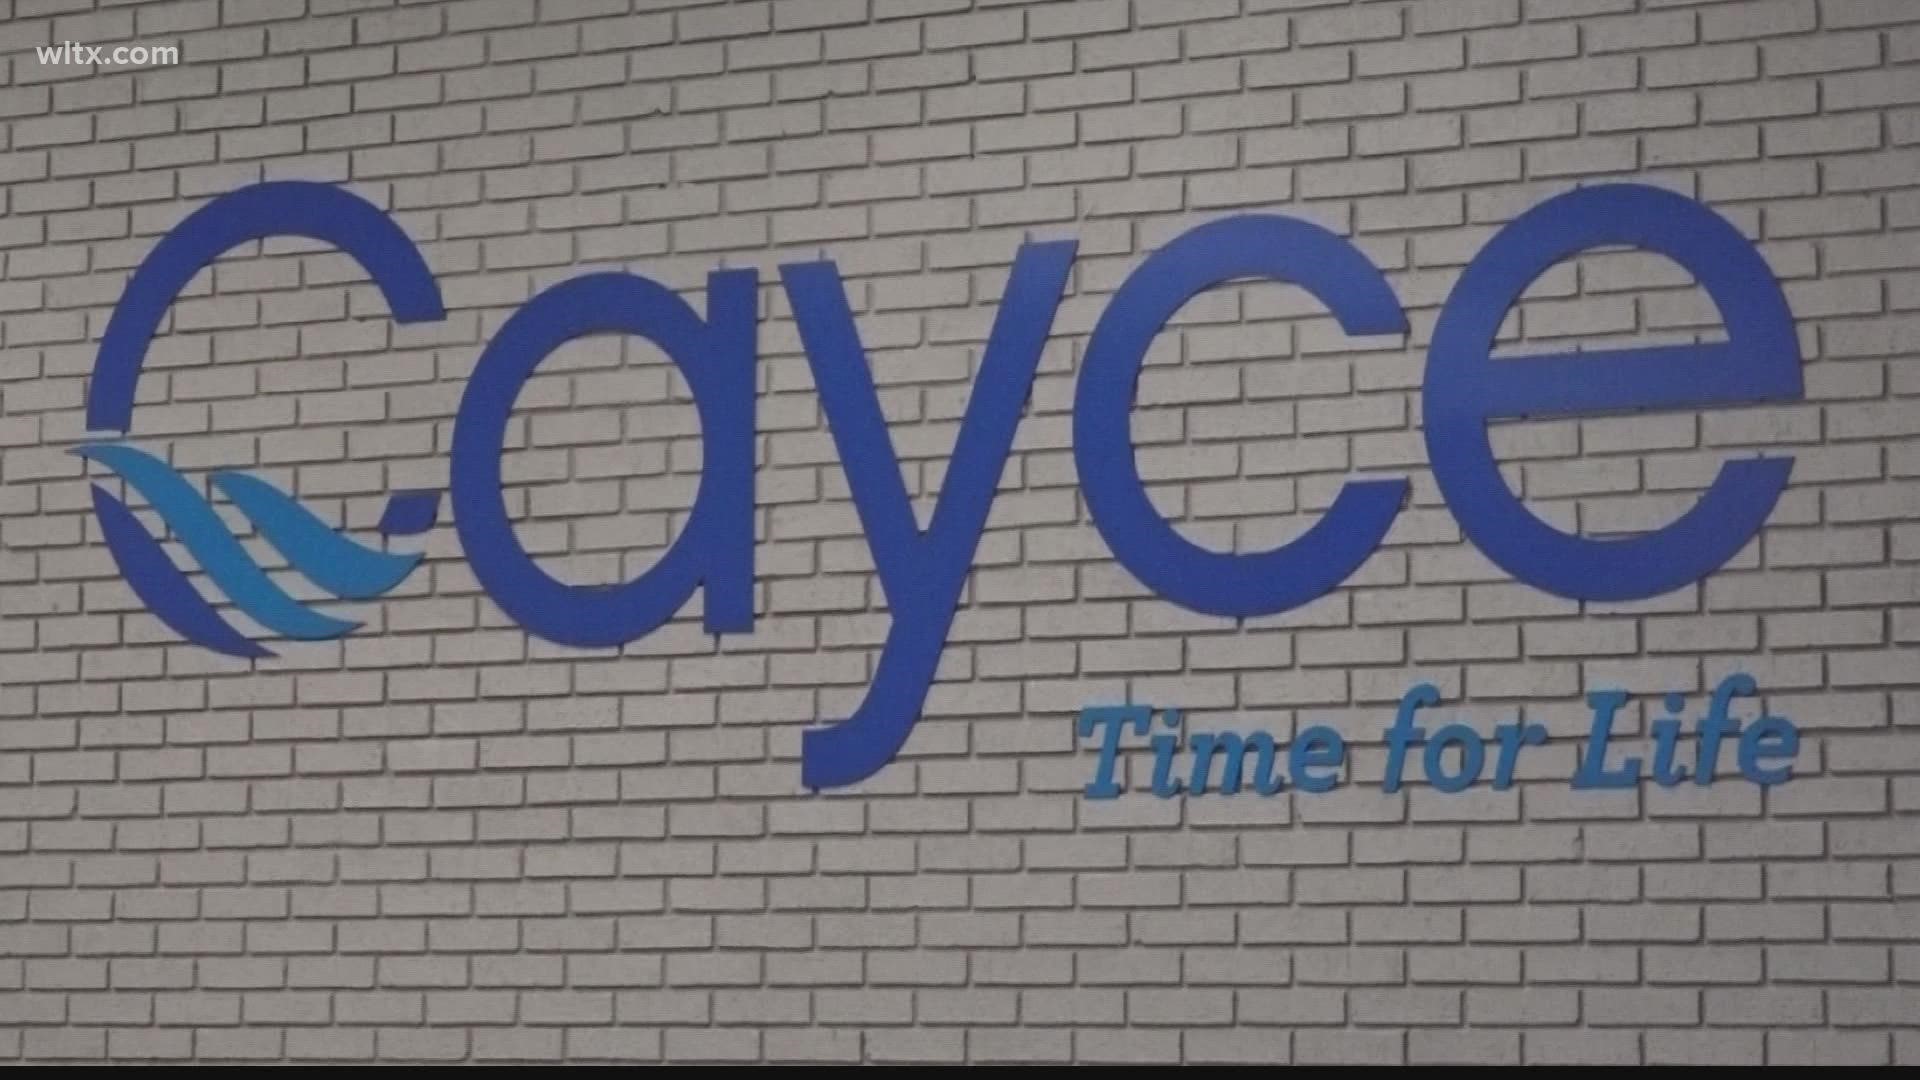 Here's a look at Cayce's budget for the upcoming year and why city council is collecting more money.